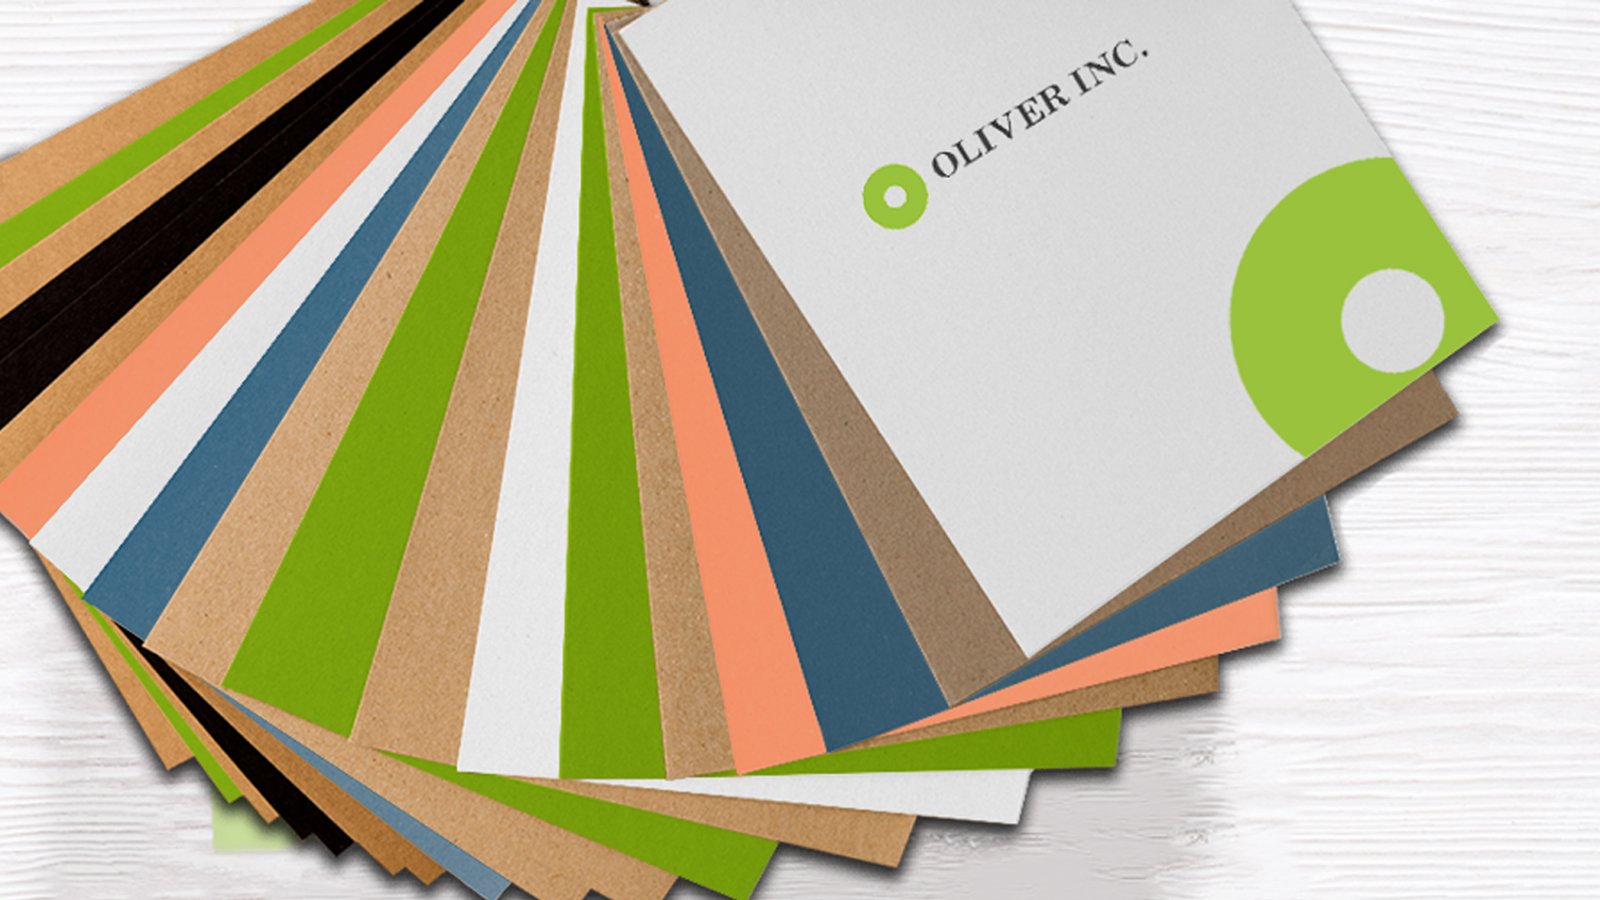 Oliver Paperboard Card Option for Packaging - Wide array of card colors with top card having Oliver logo